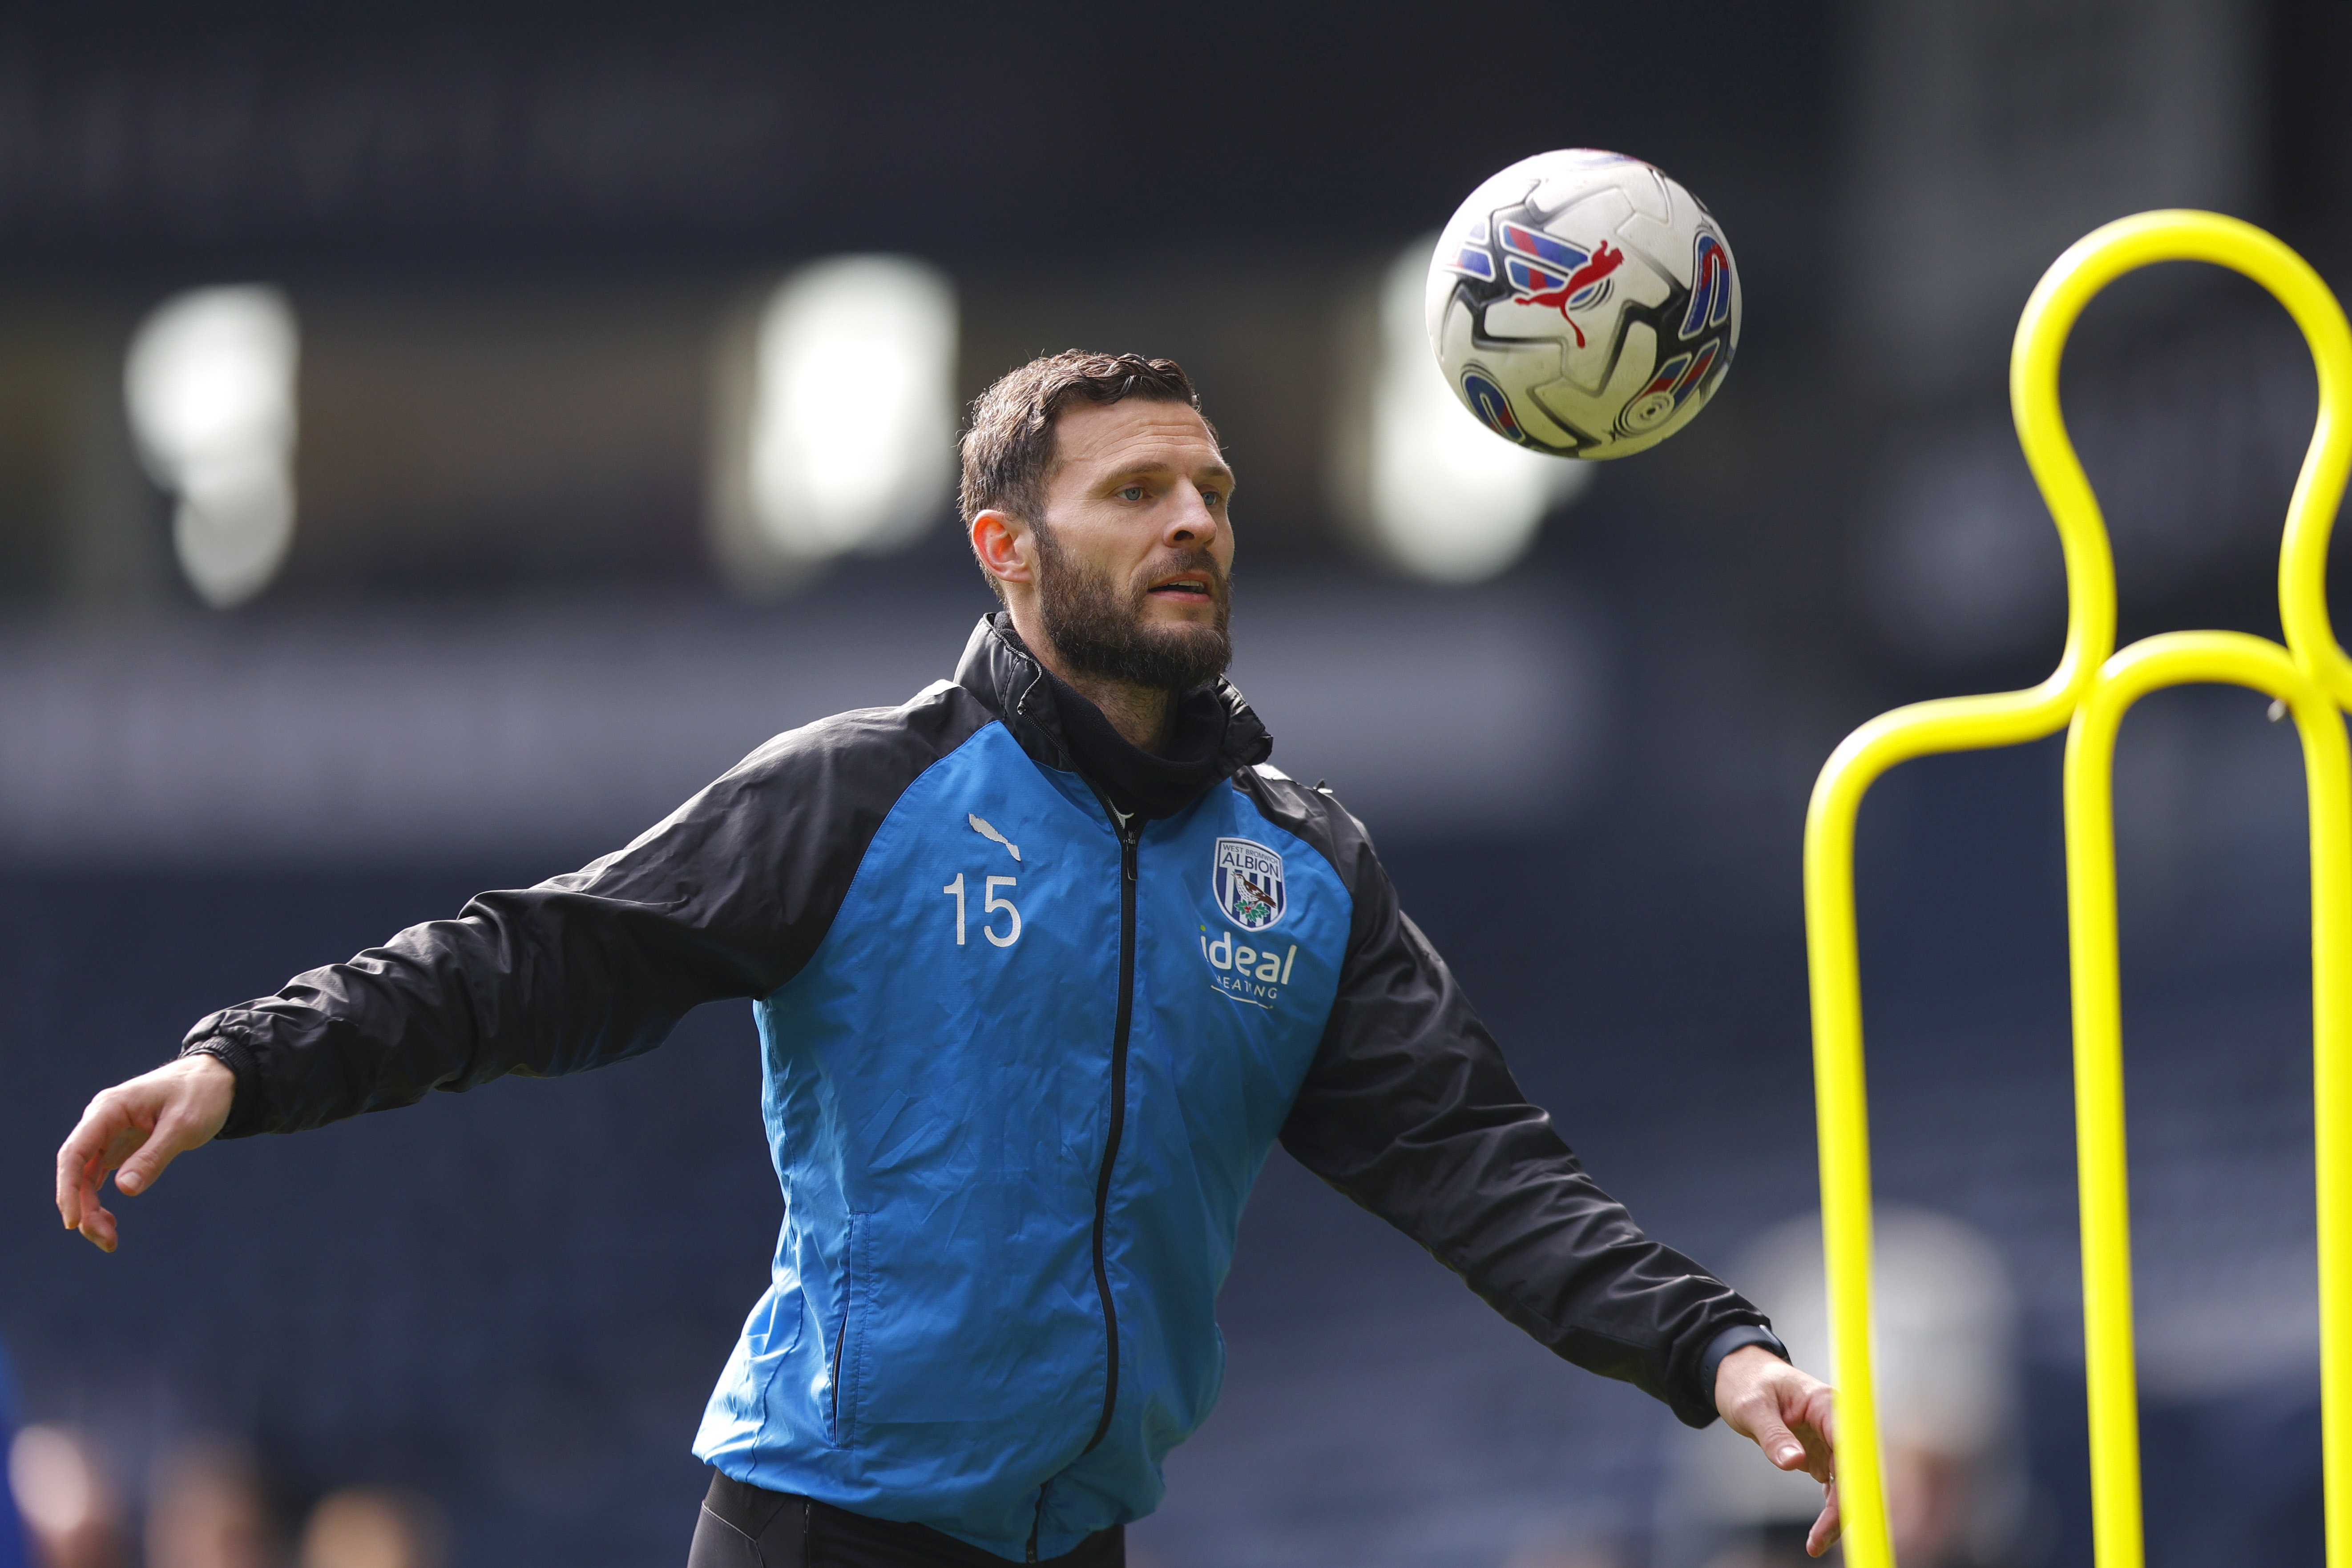 Erik Pieters watching the ball during a training session at The Hawthorns